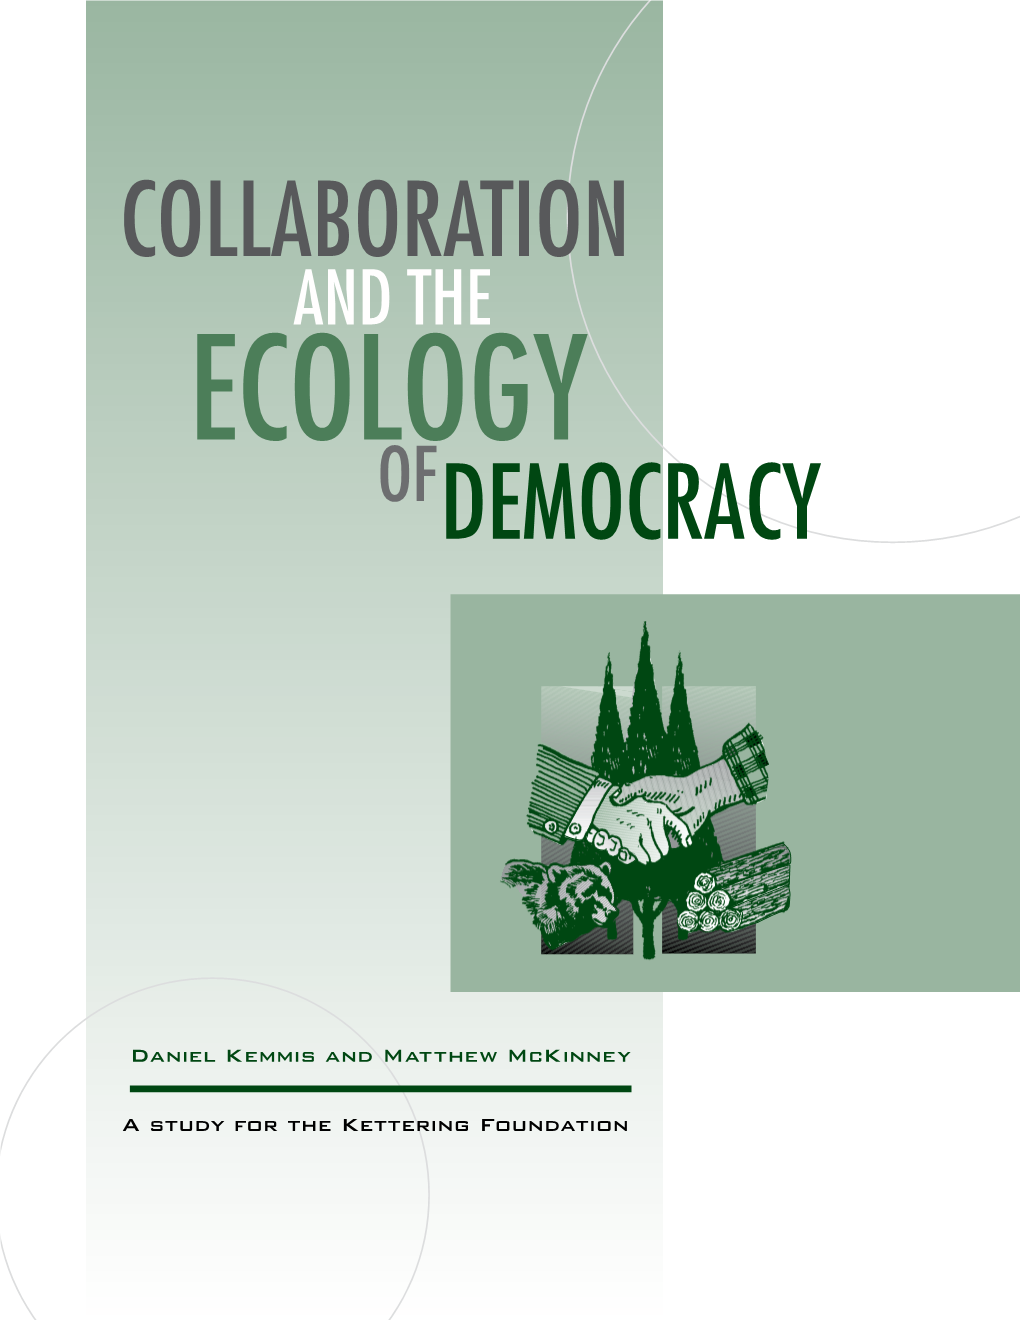 Collaboration and the Ecology Democracy